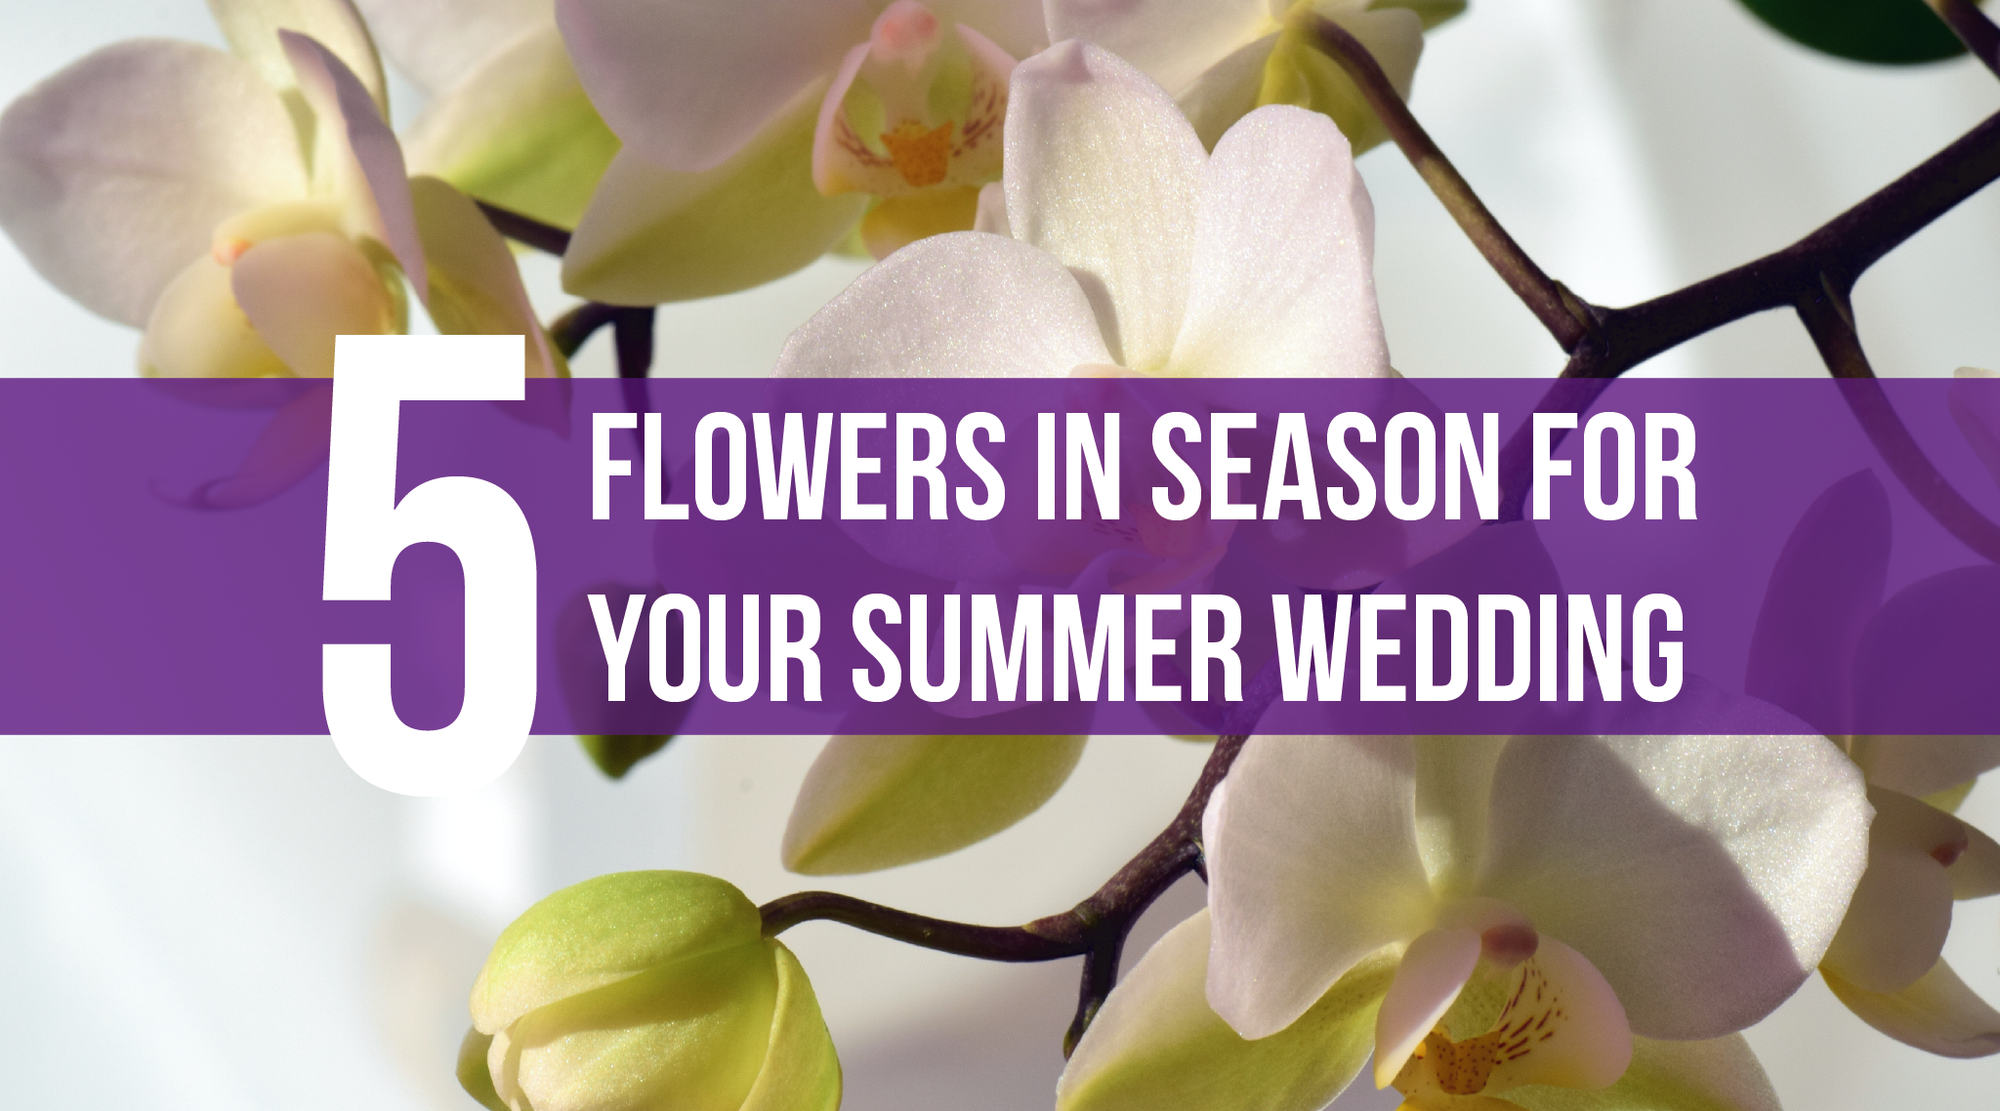 5 Flowers in Season for Your Summer Wedding